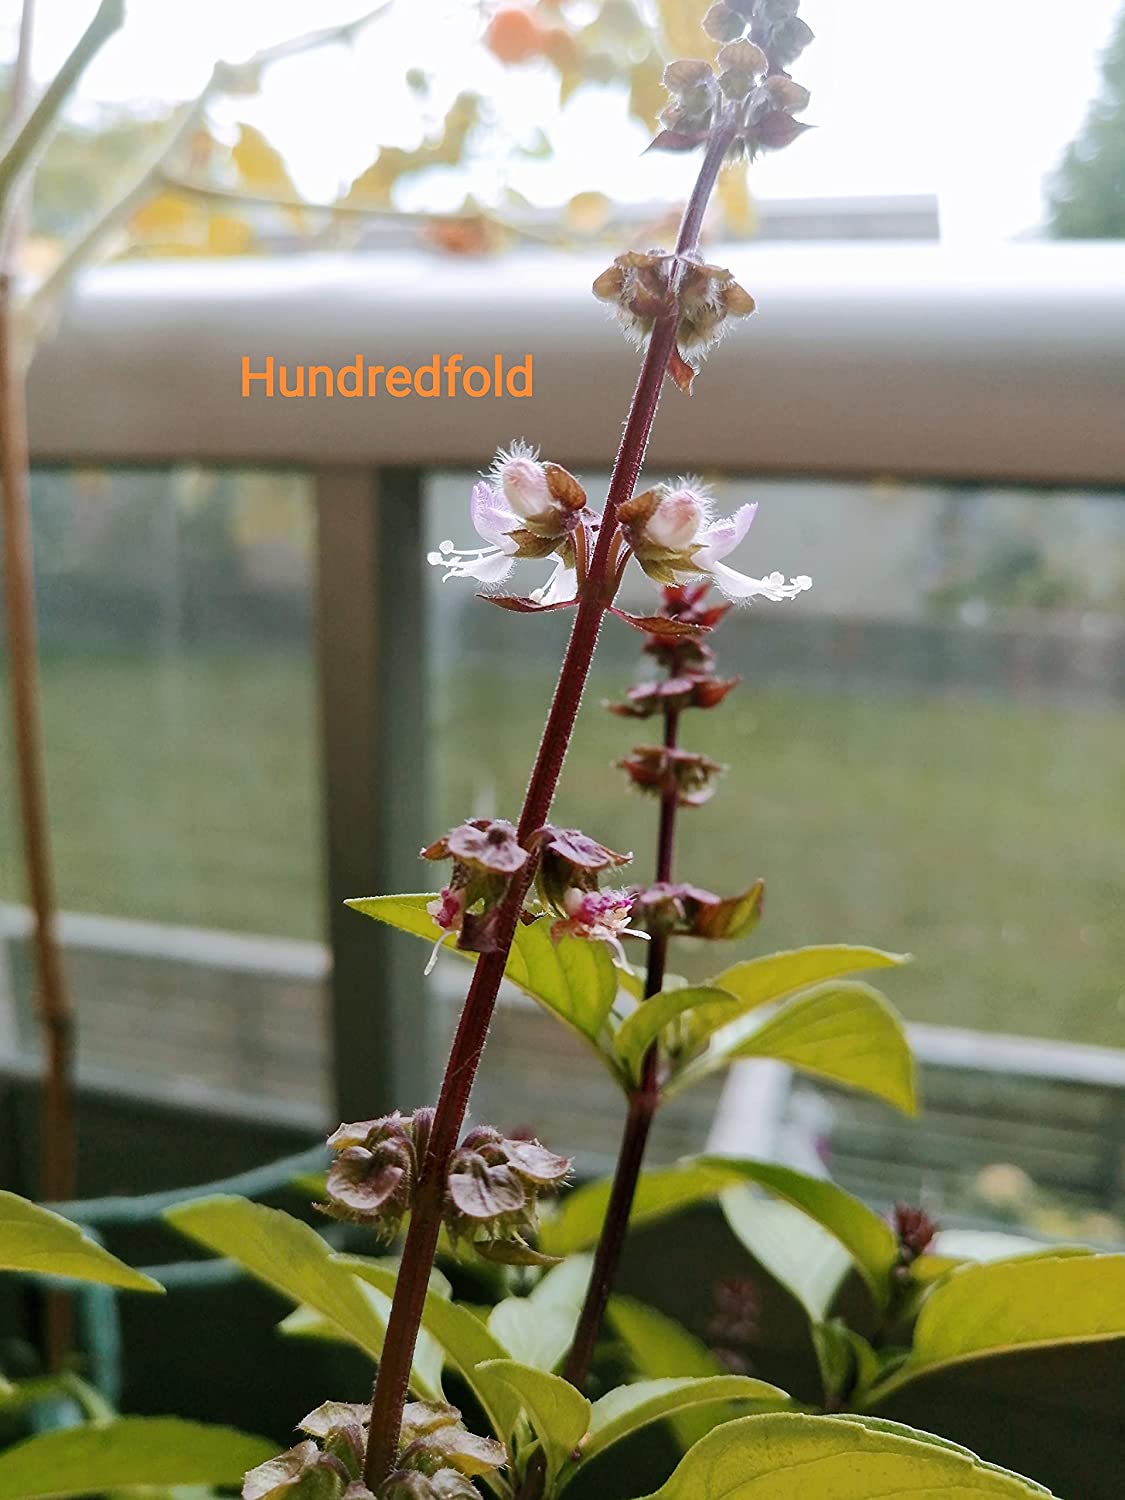 Hundredfold Cinnamon Basil 200 Flowering Herb Seeds - Non-GMO Ocimum basilicum Purple Stems and Flowers, Dural Purpose Plant: Fillers for Bouquets and Kitchen Herb